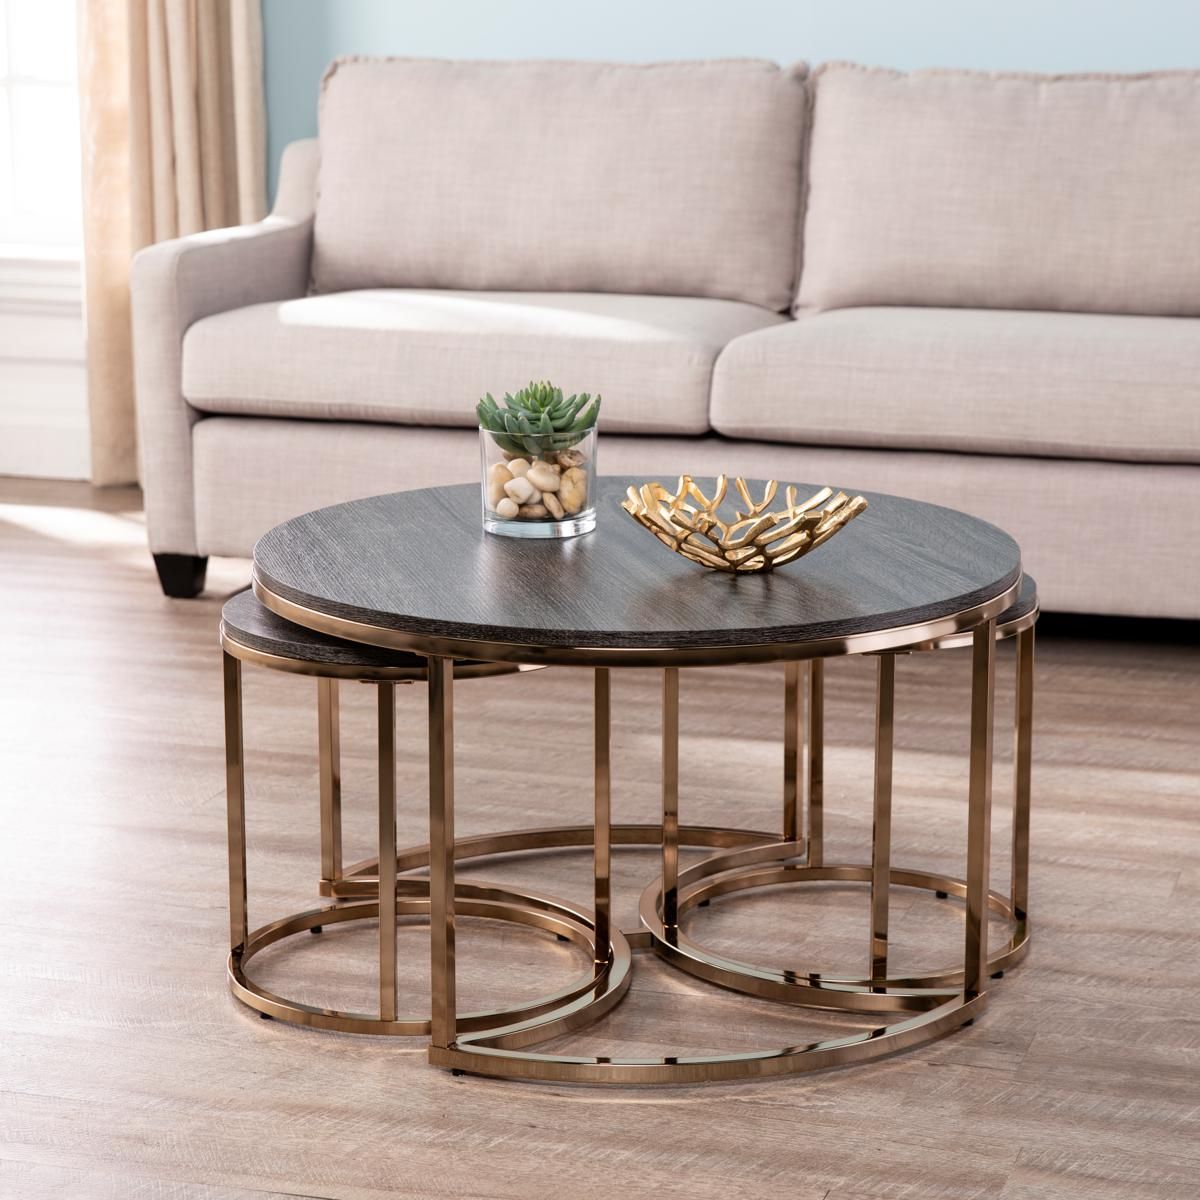 Lakenheath 3 Piece Nesting Cocktail Table Set – Champagne – 9248247 | Hsn Within Coffee Tables Of 3 Nesting Tables (View 13 of 15)